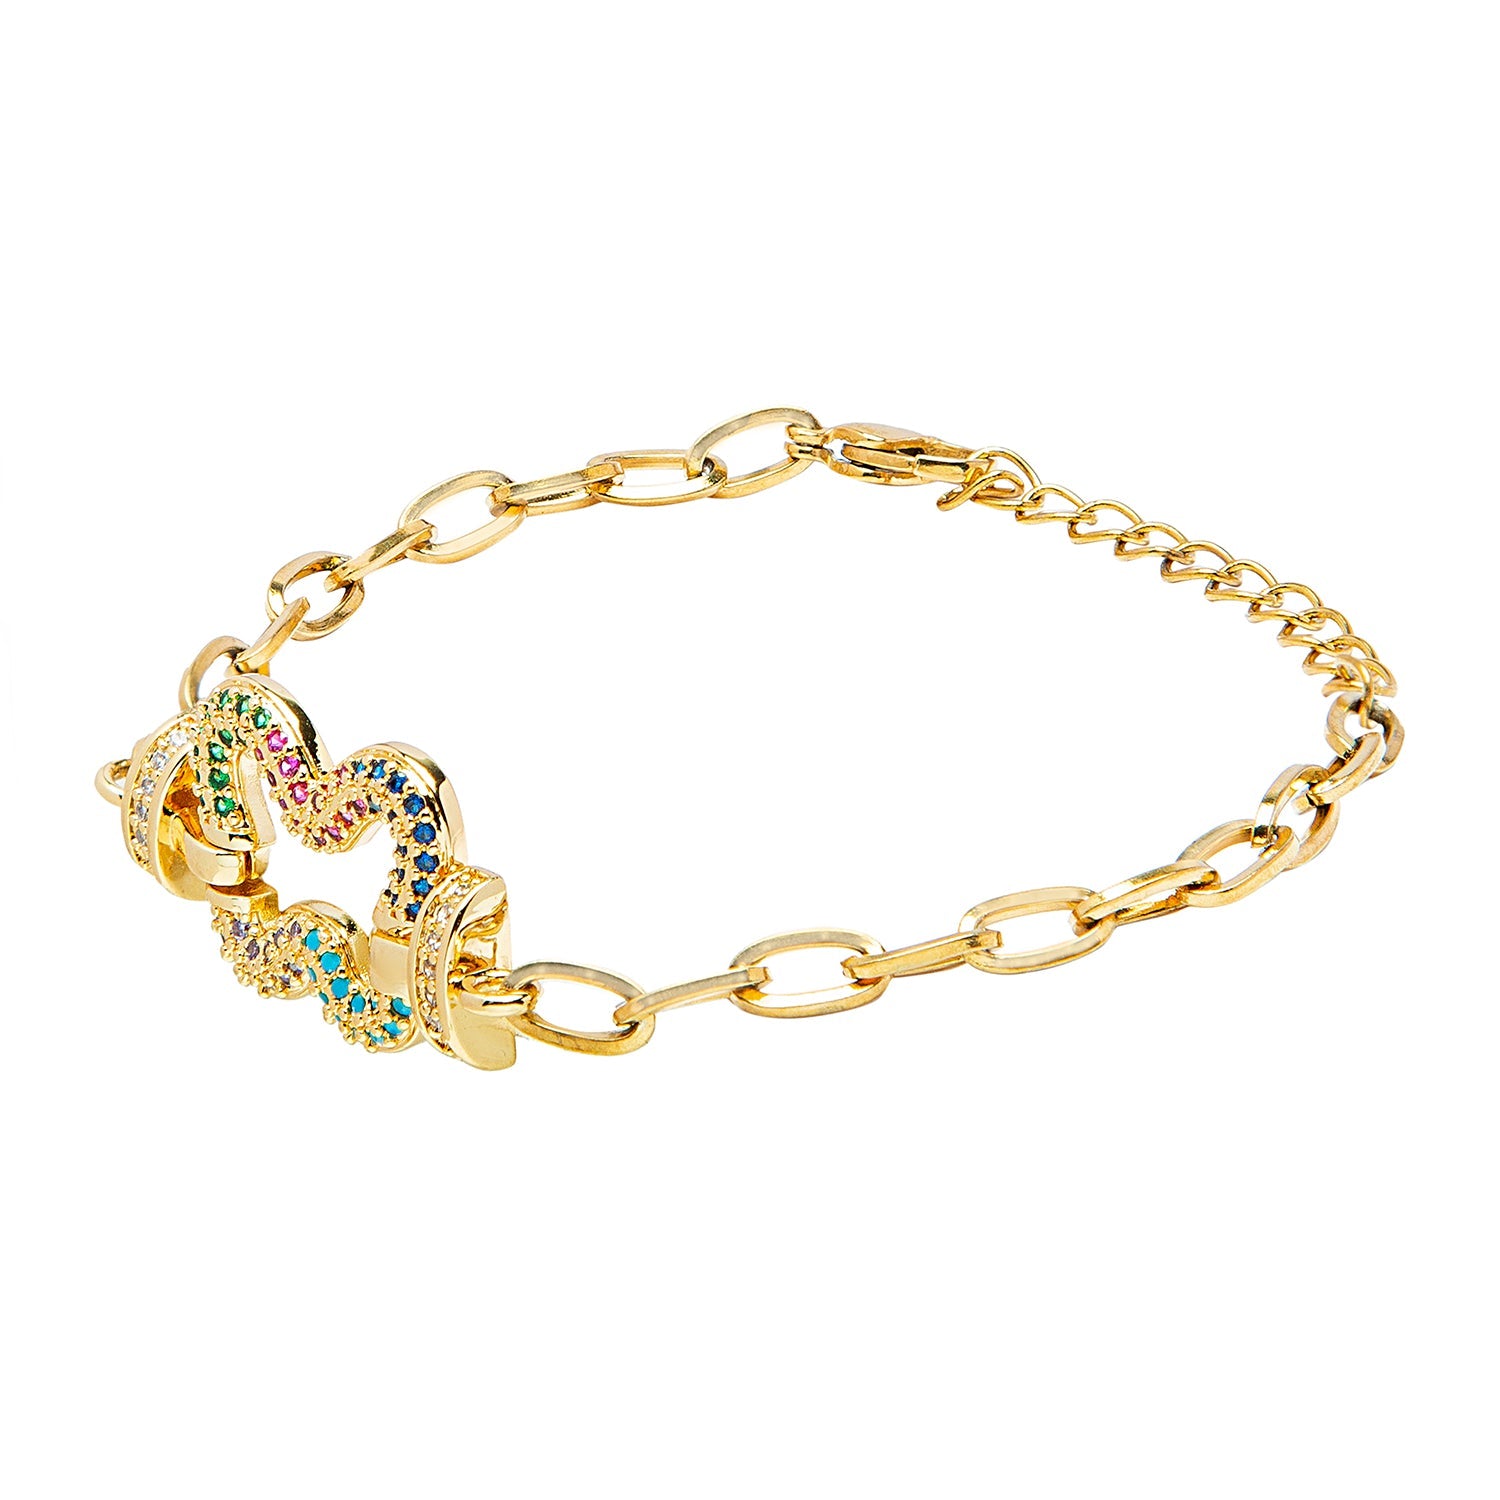 Buy Latest Simple First Quality Gold Plated Stylish Gold Bracelet Designs  for Girls